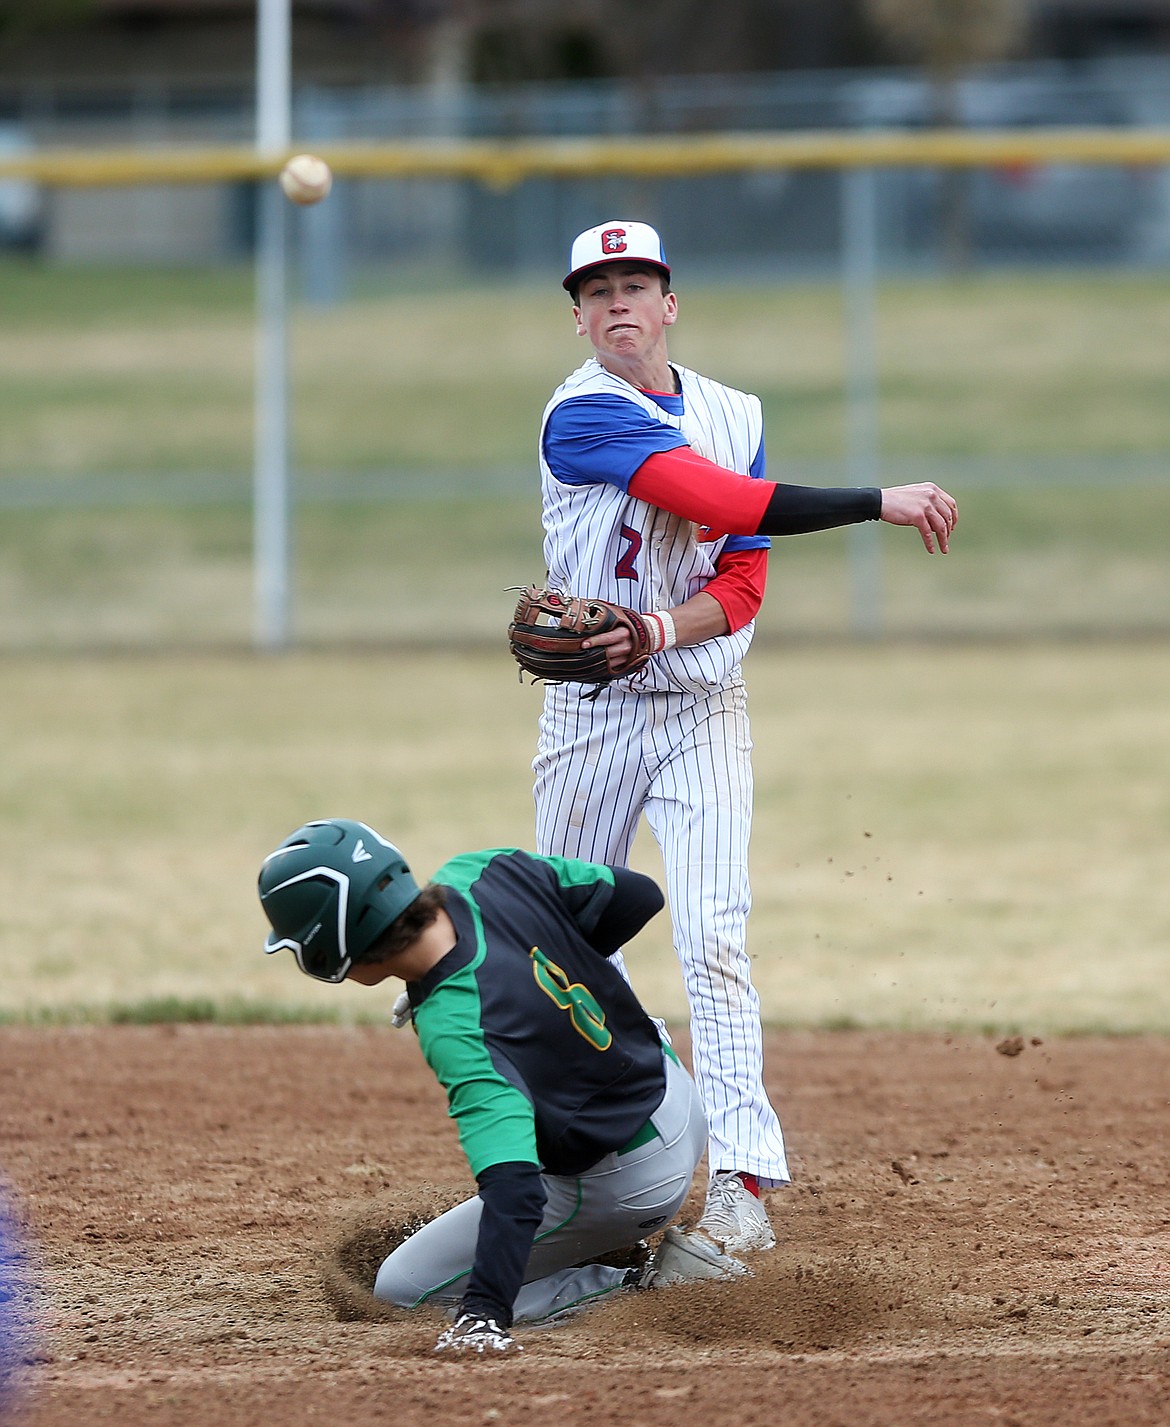 Lakeland's Nicolas Welch tries to breakup a double play and is called out as Coeur d'Alene's Jake Brown throws to first to complete the play in Wednesday's game at Coeur d'Alene High. (LOREN BENOIT/Press)